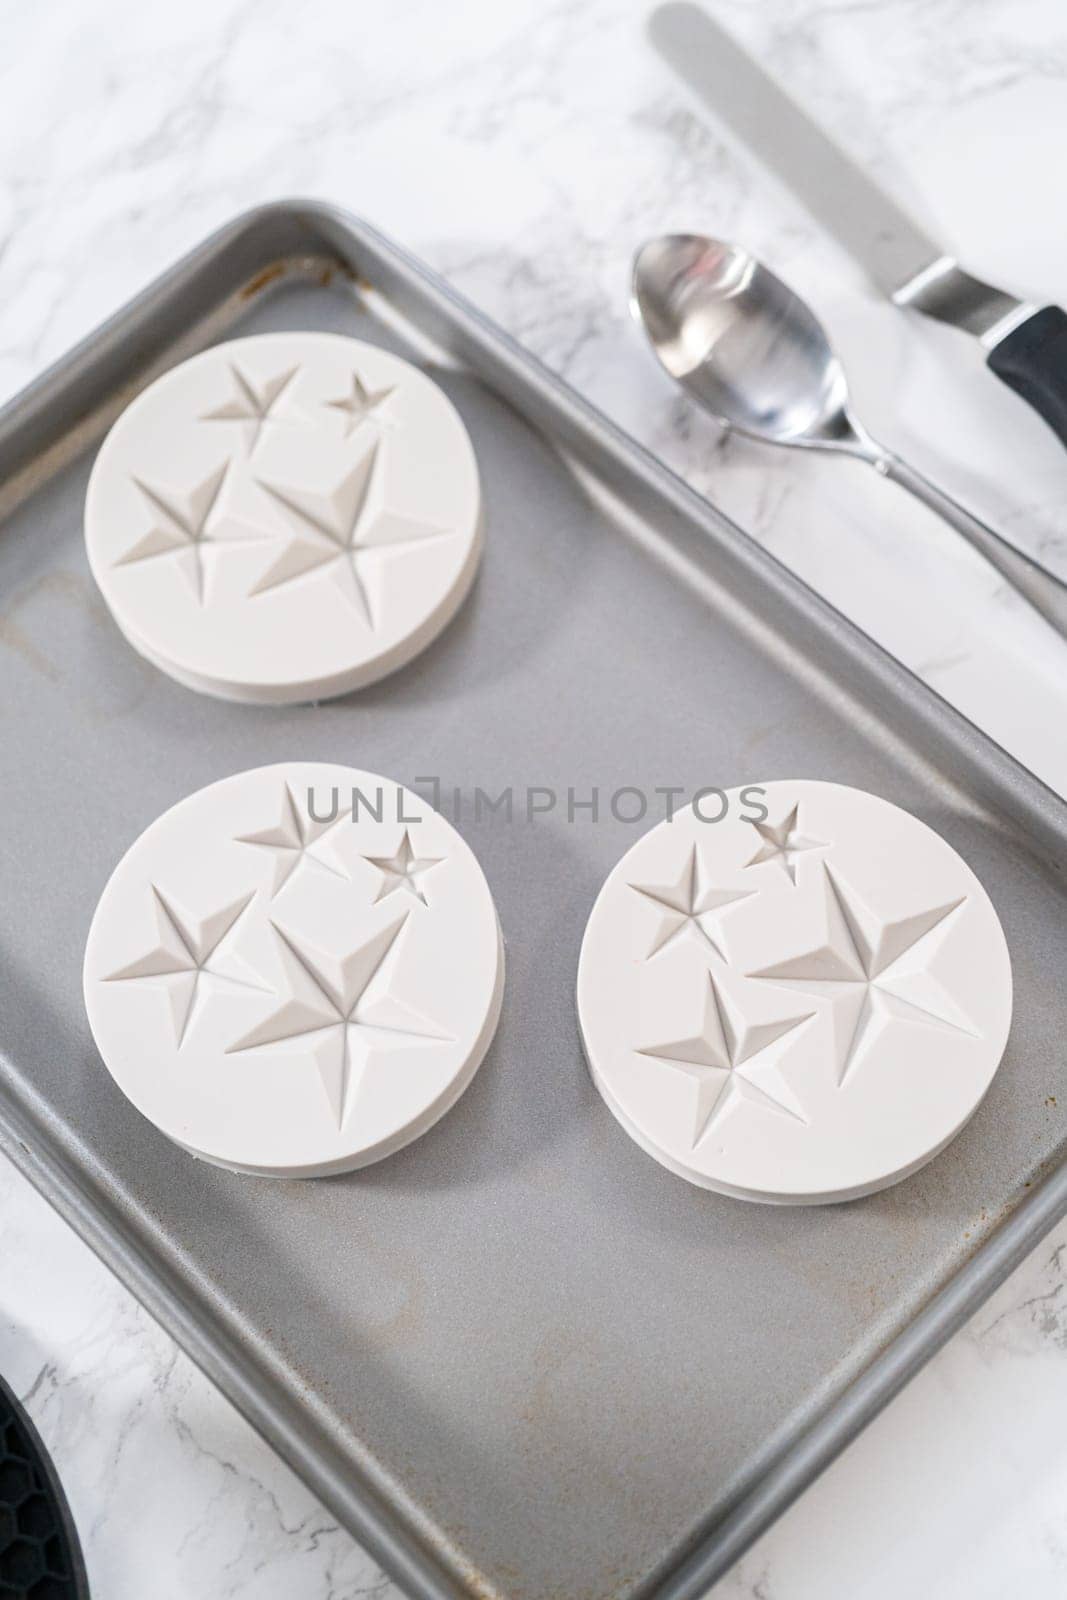 Filling silicone mold with white melted chocolate to make chocolate chocolate stars for American flag mini cupcakes.